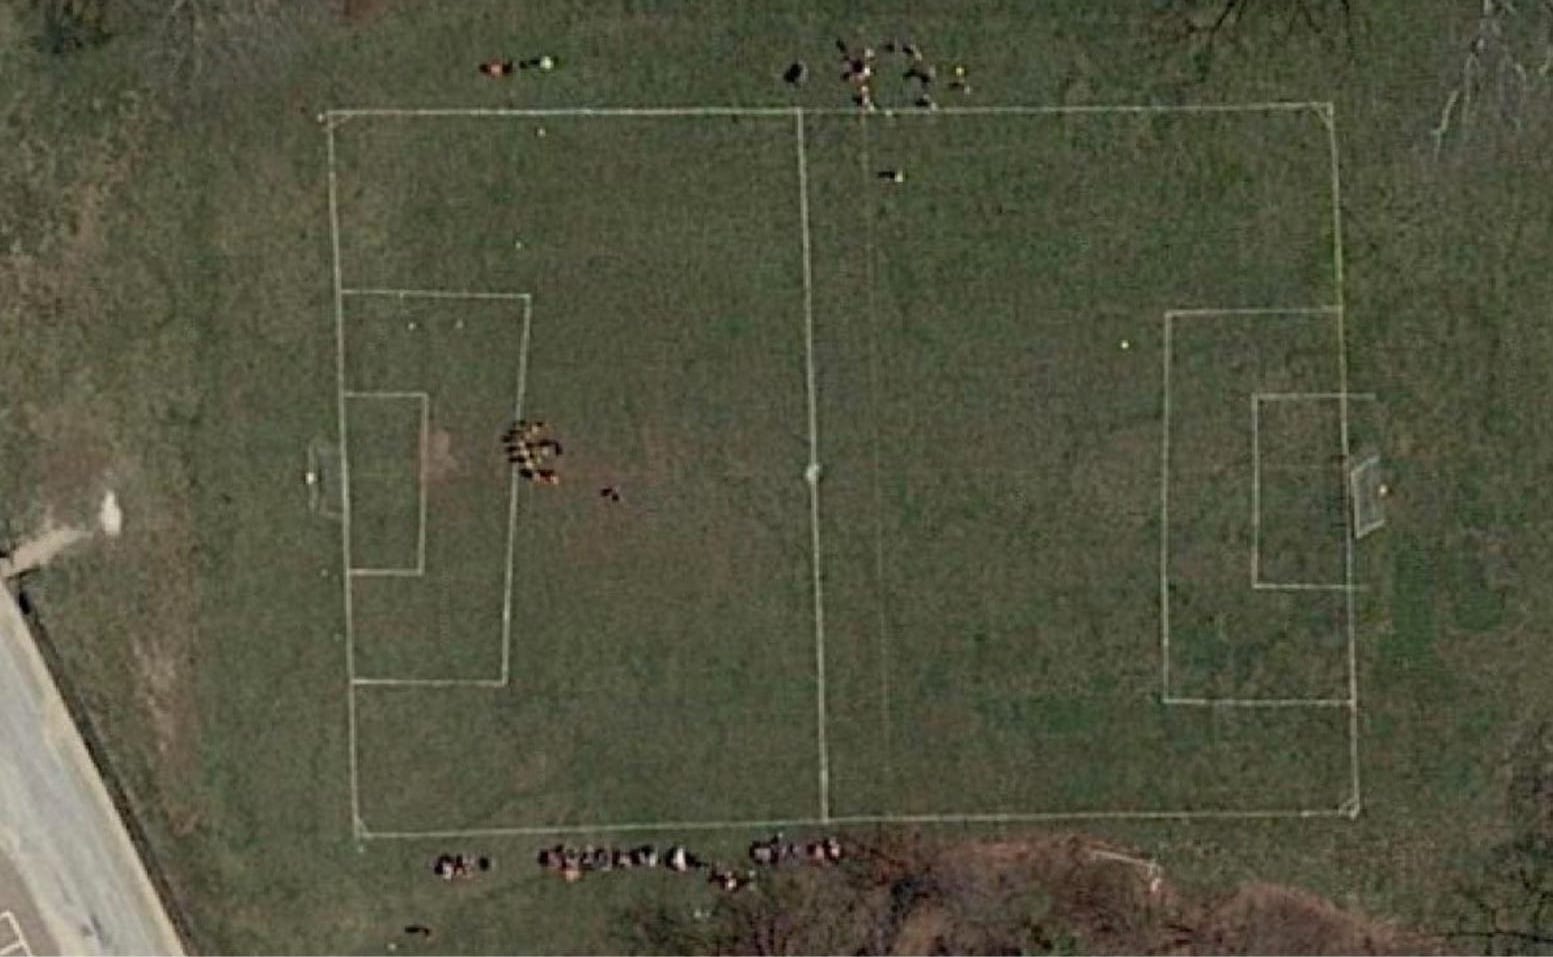 Picture of Field without our services